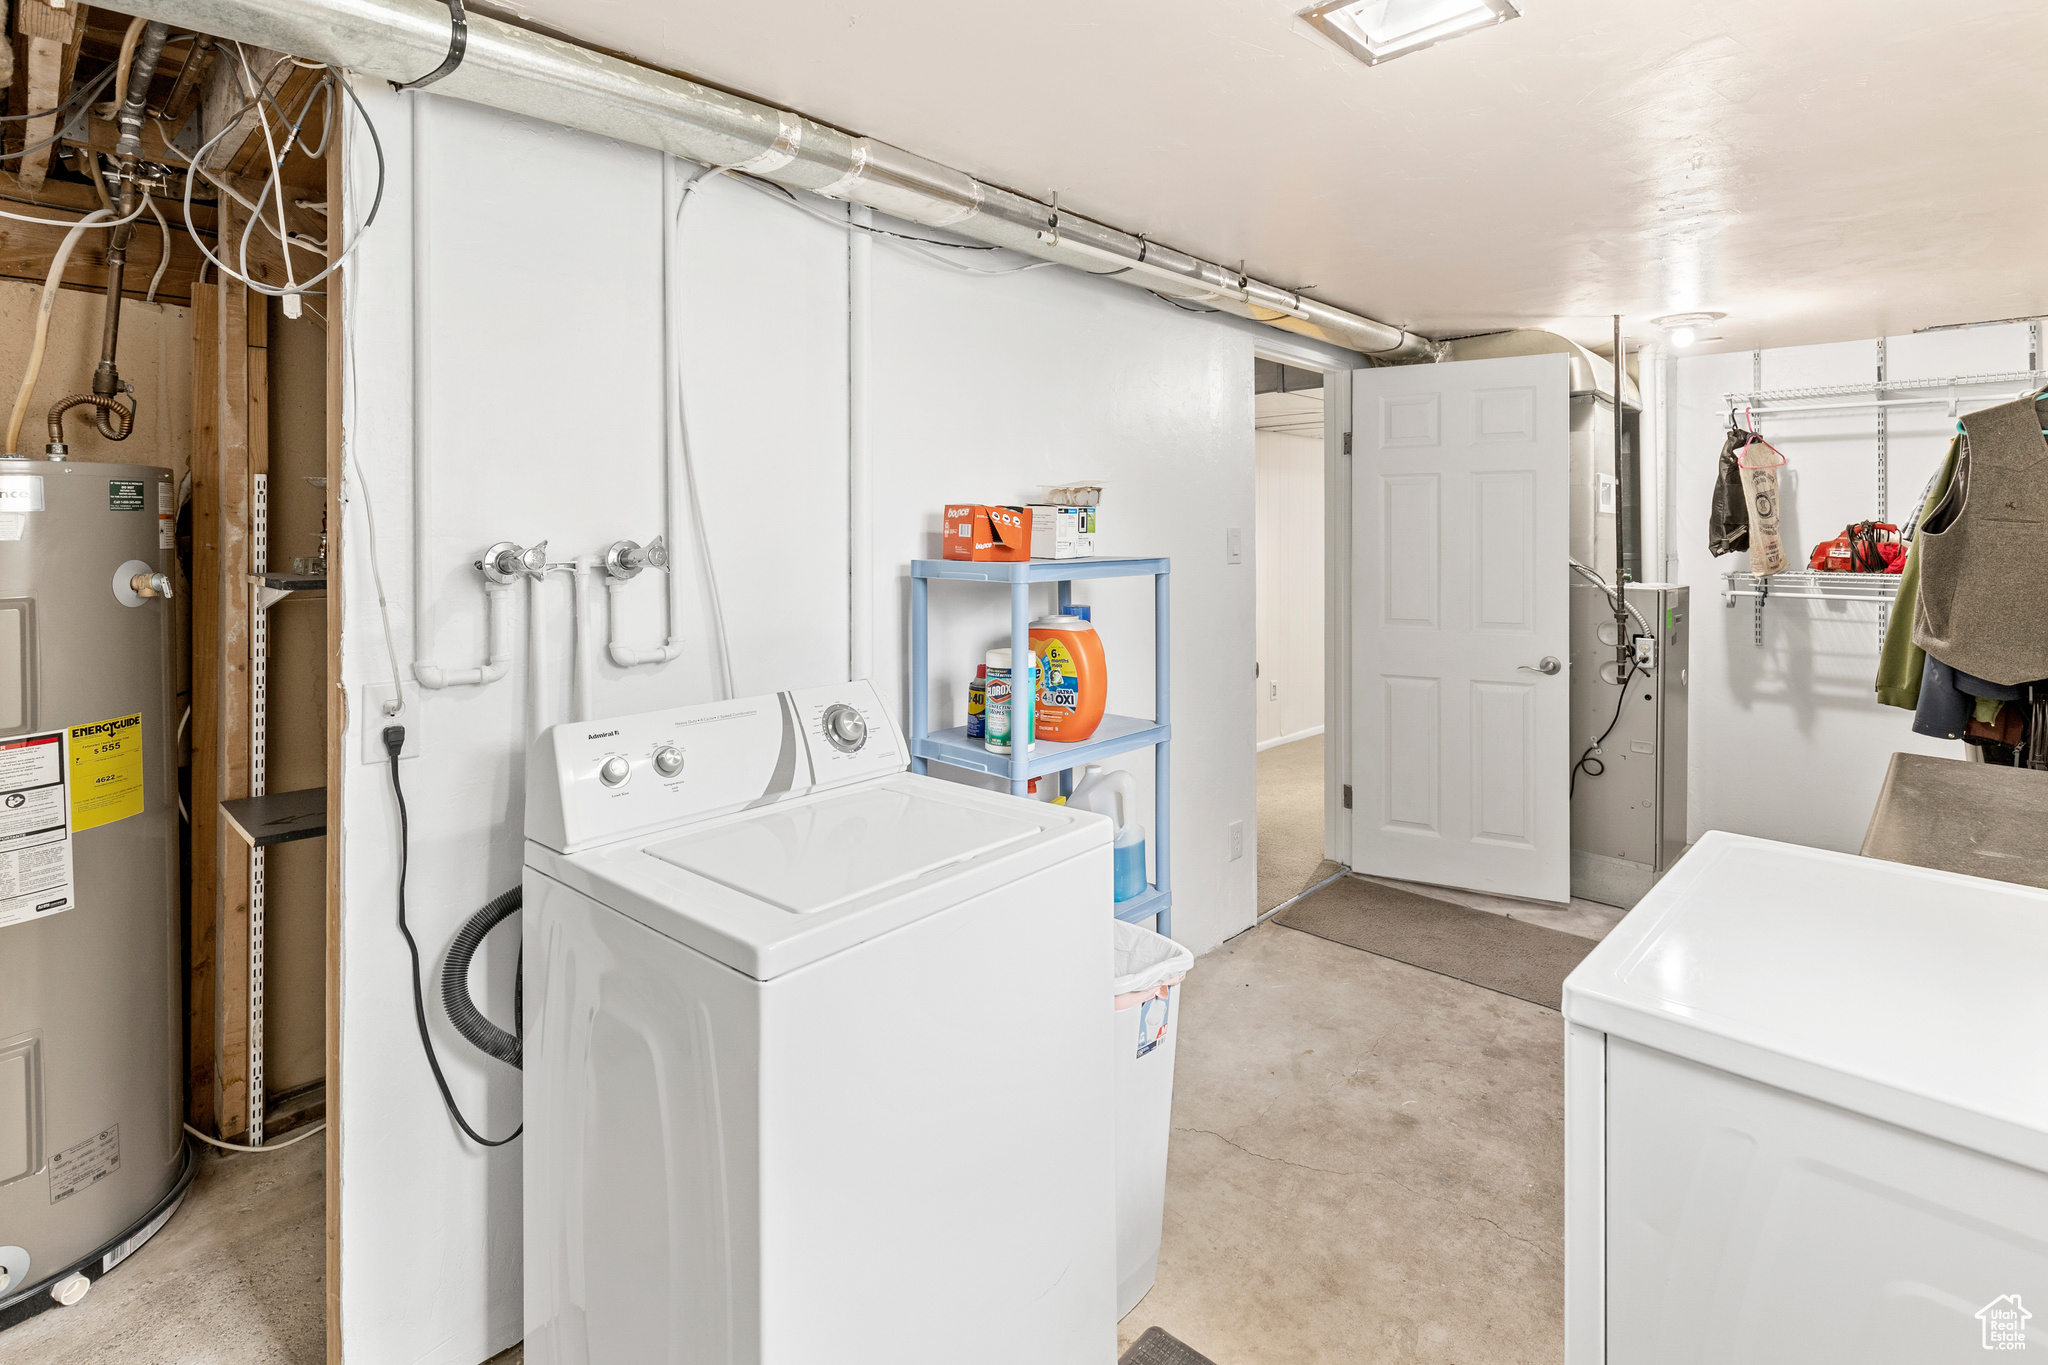 Laundry room featuring separate washer and dryer and electric water heater